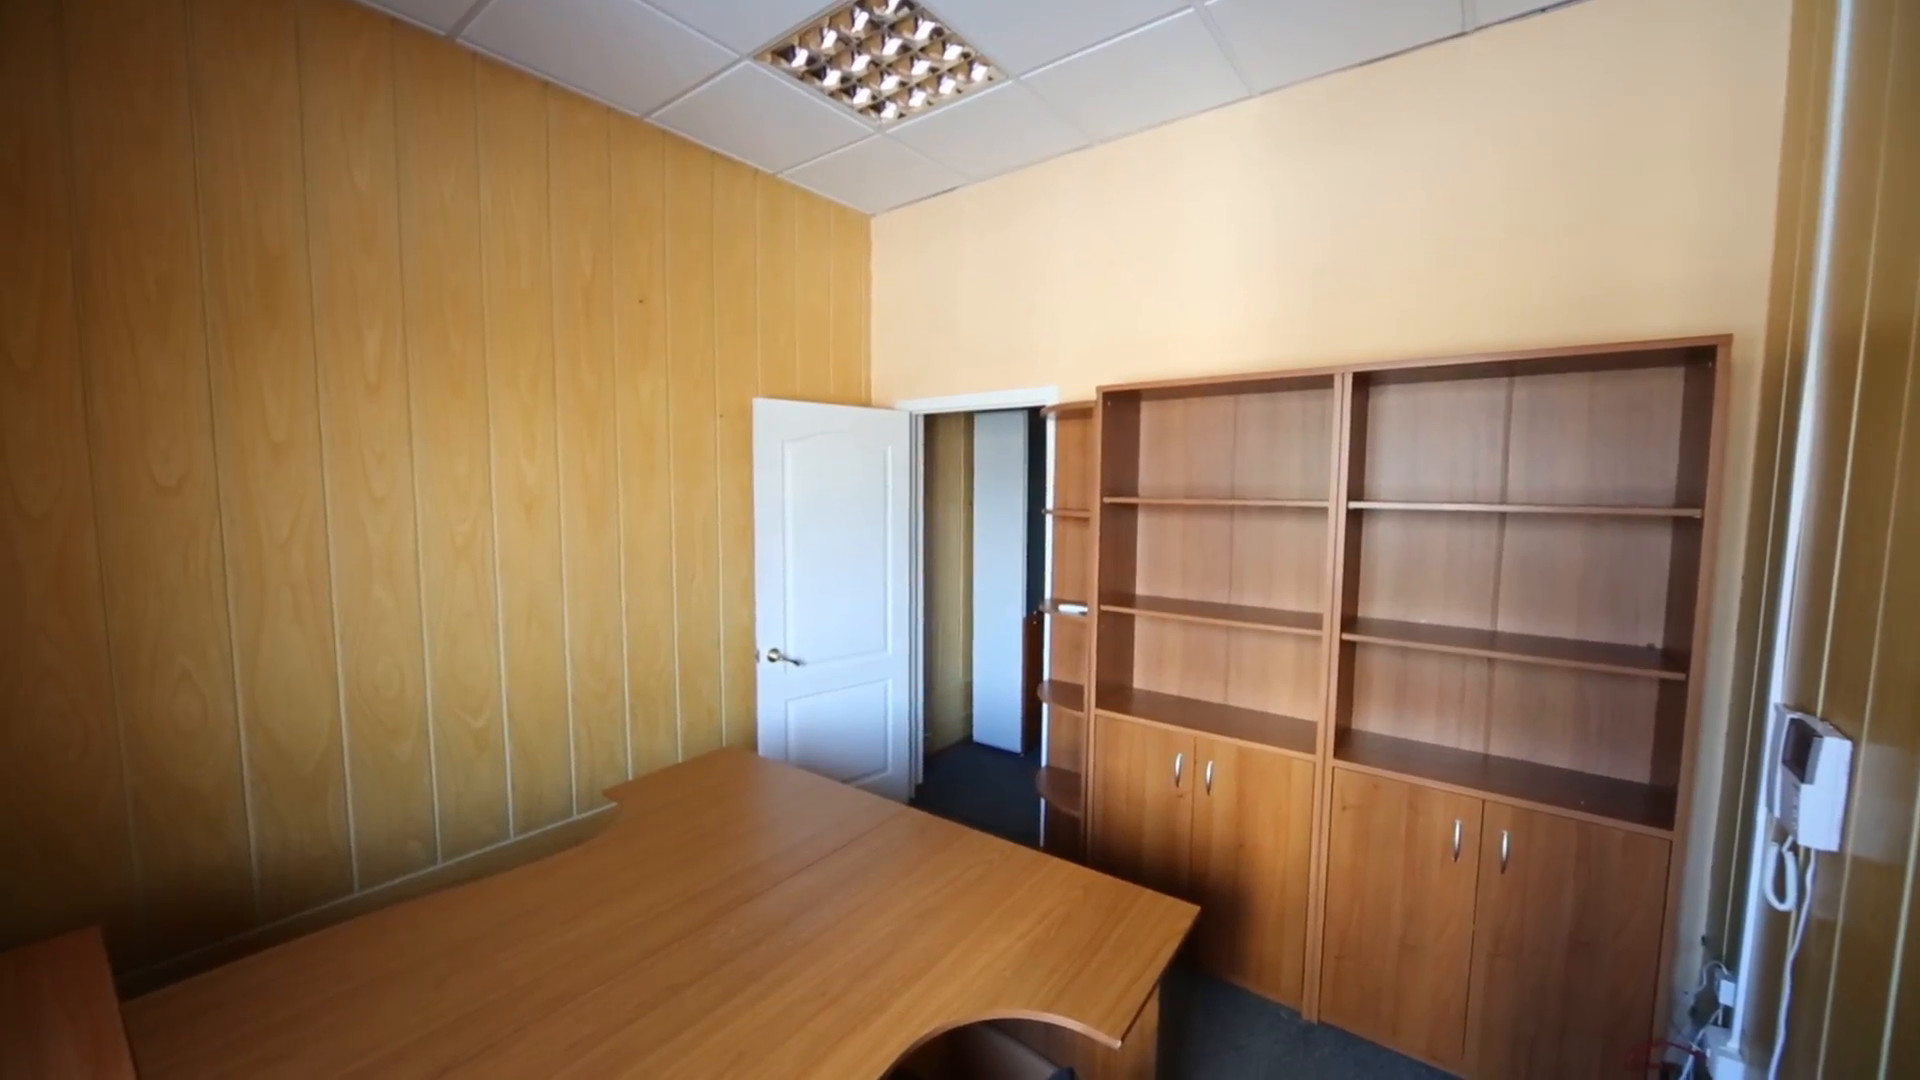 A small office room with a work desk and empty cabinets Stock Video Footage  – VideoBlocks